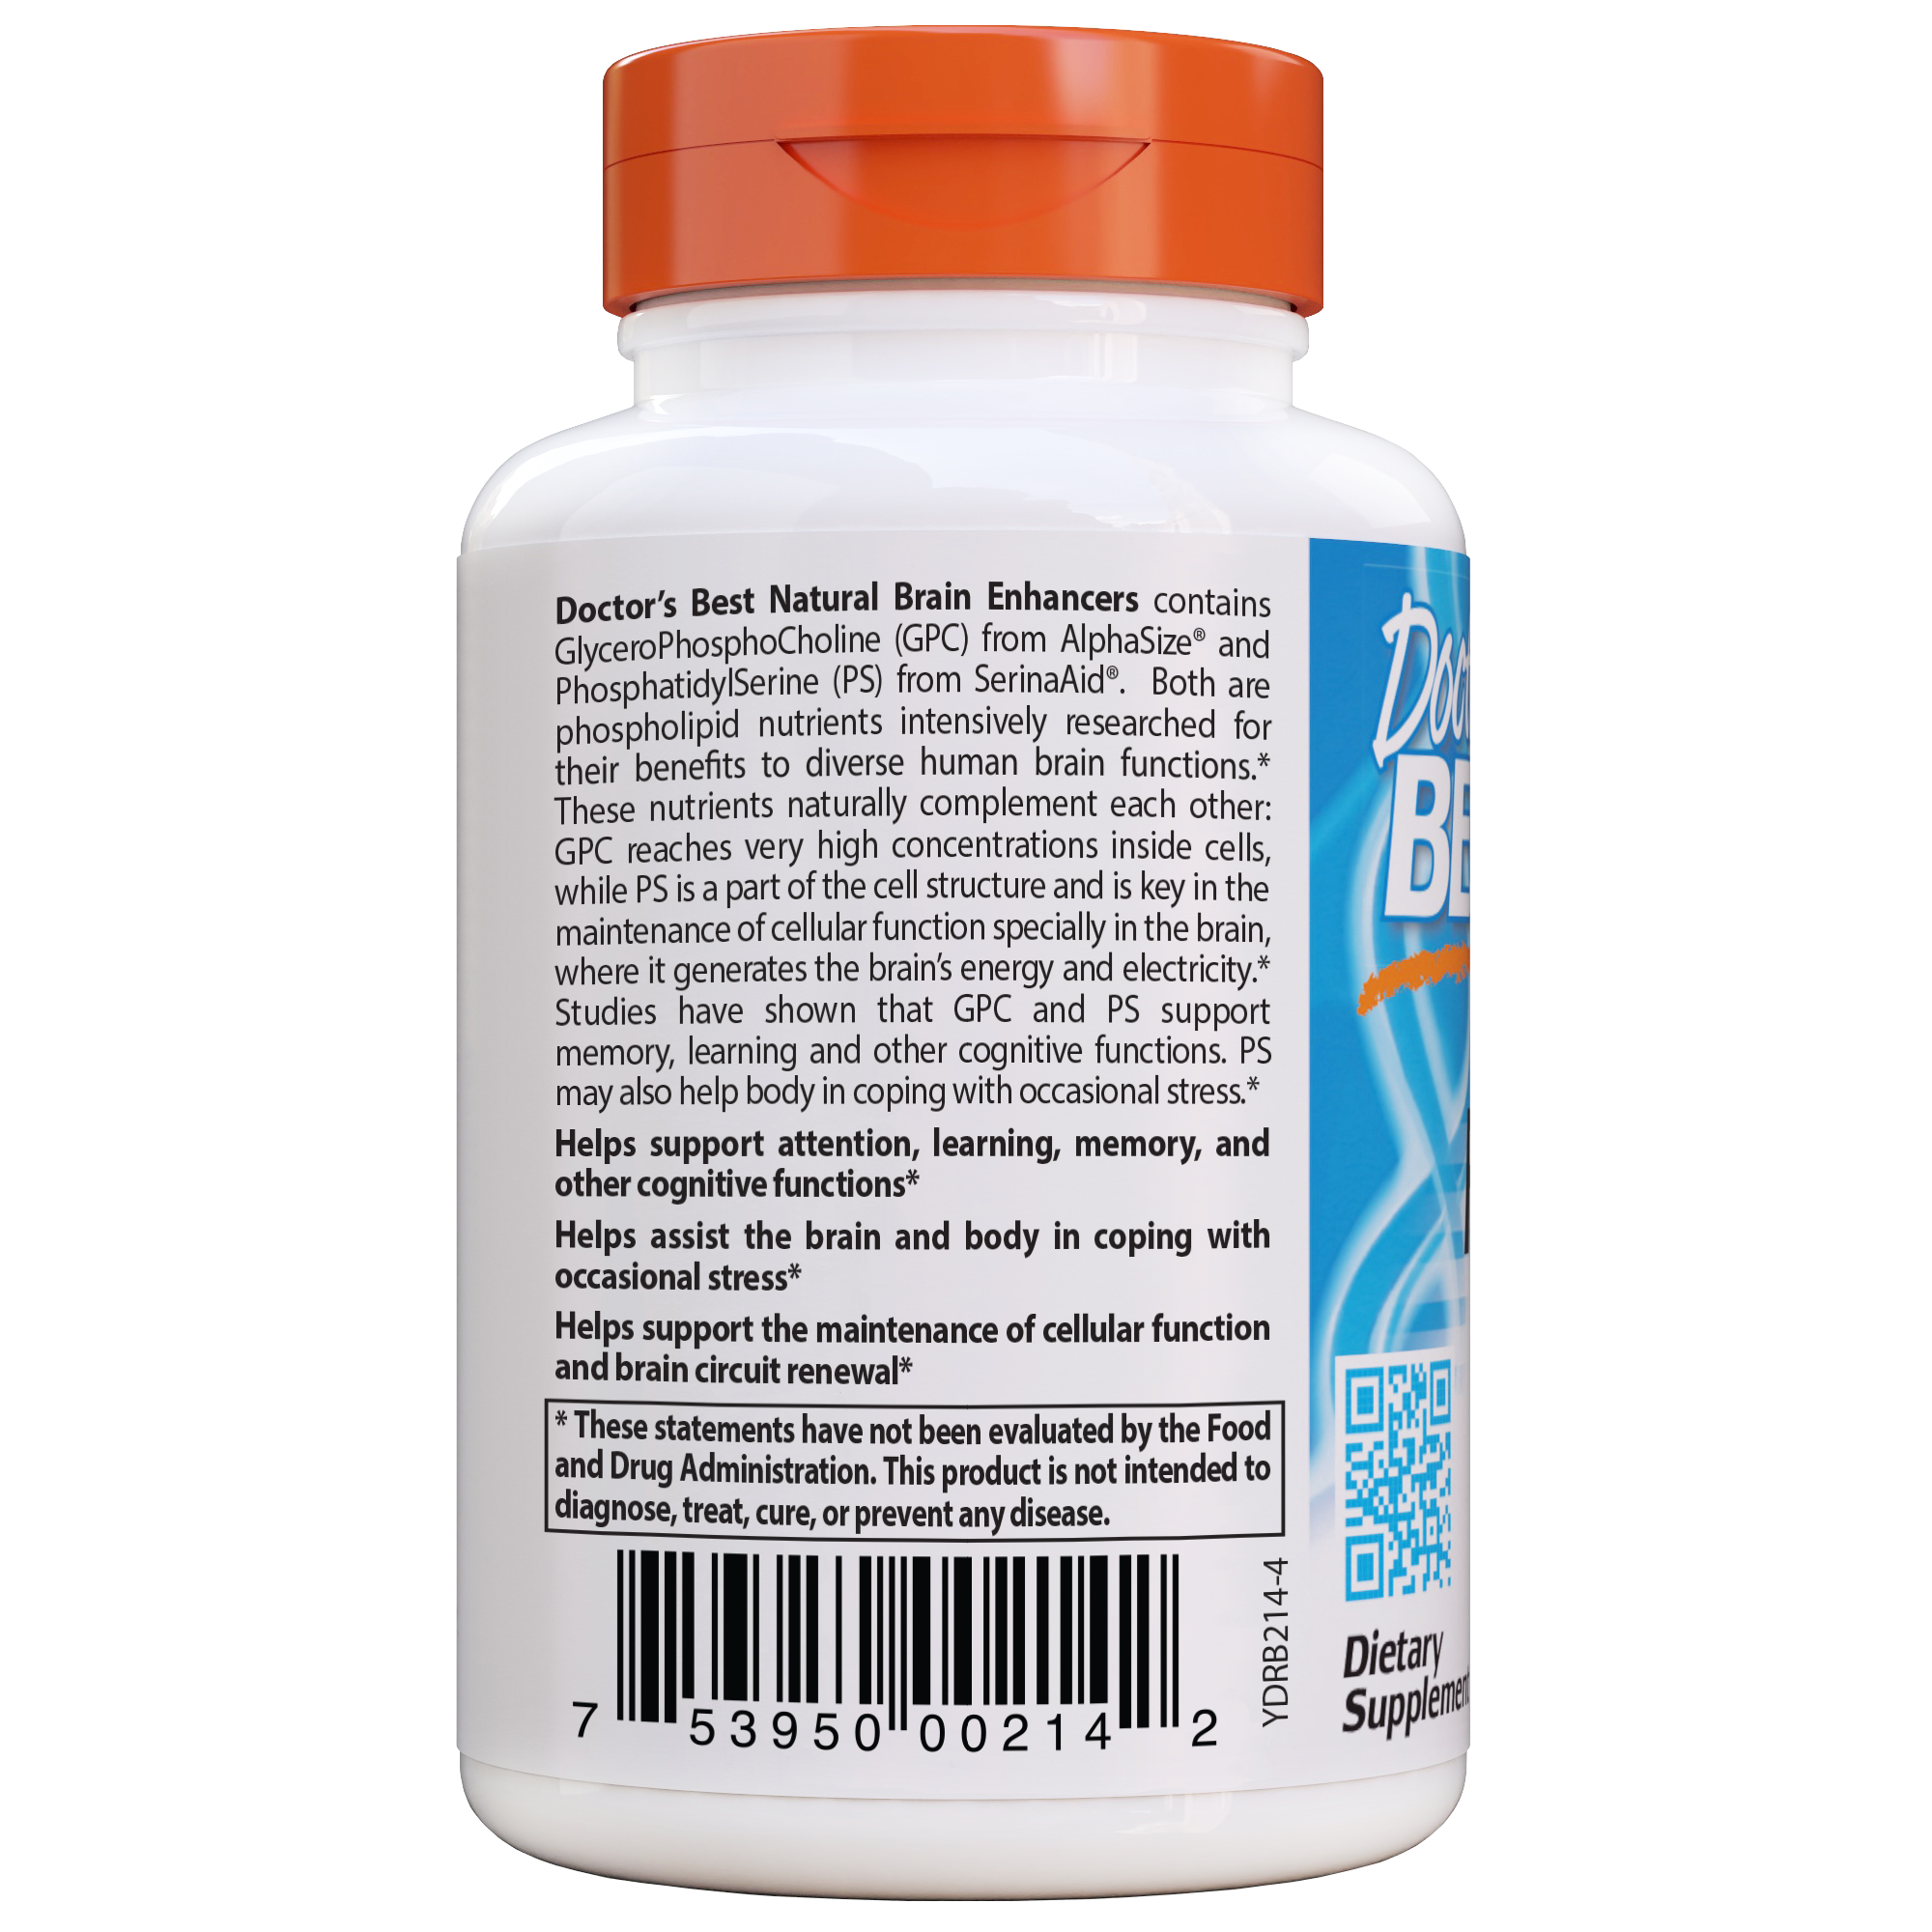 Doctor's Best Natural Brain Support, 60 vcaps【25% OFF Auto Discount】